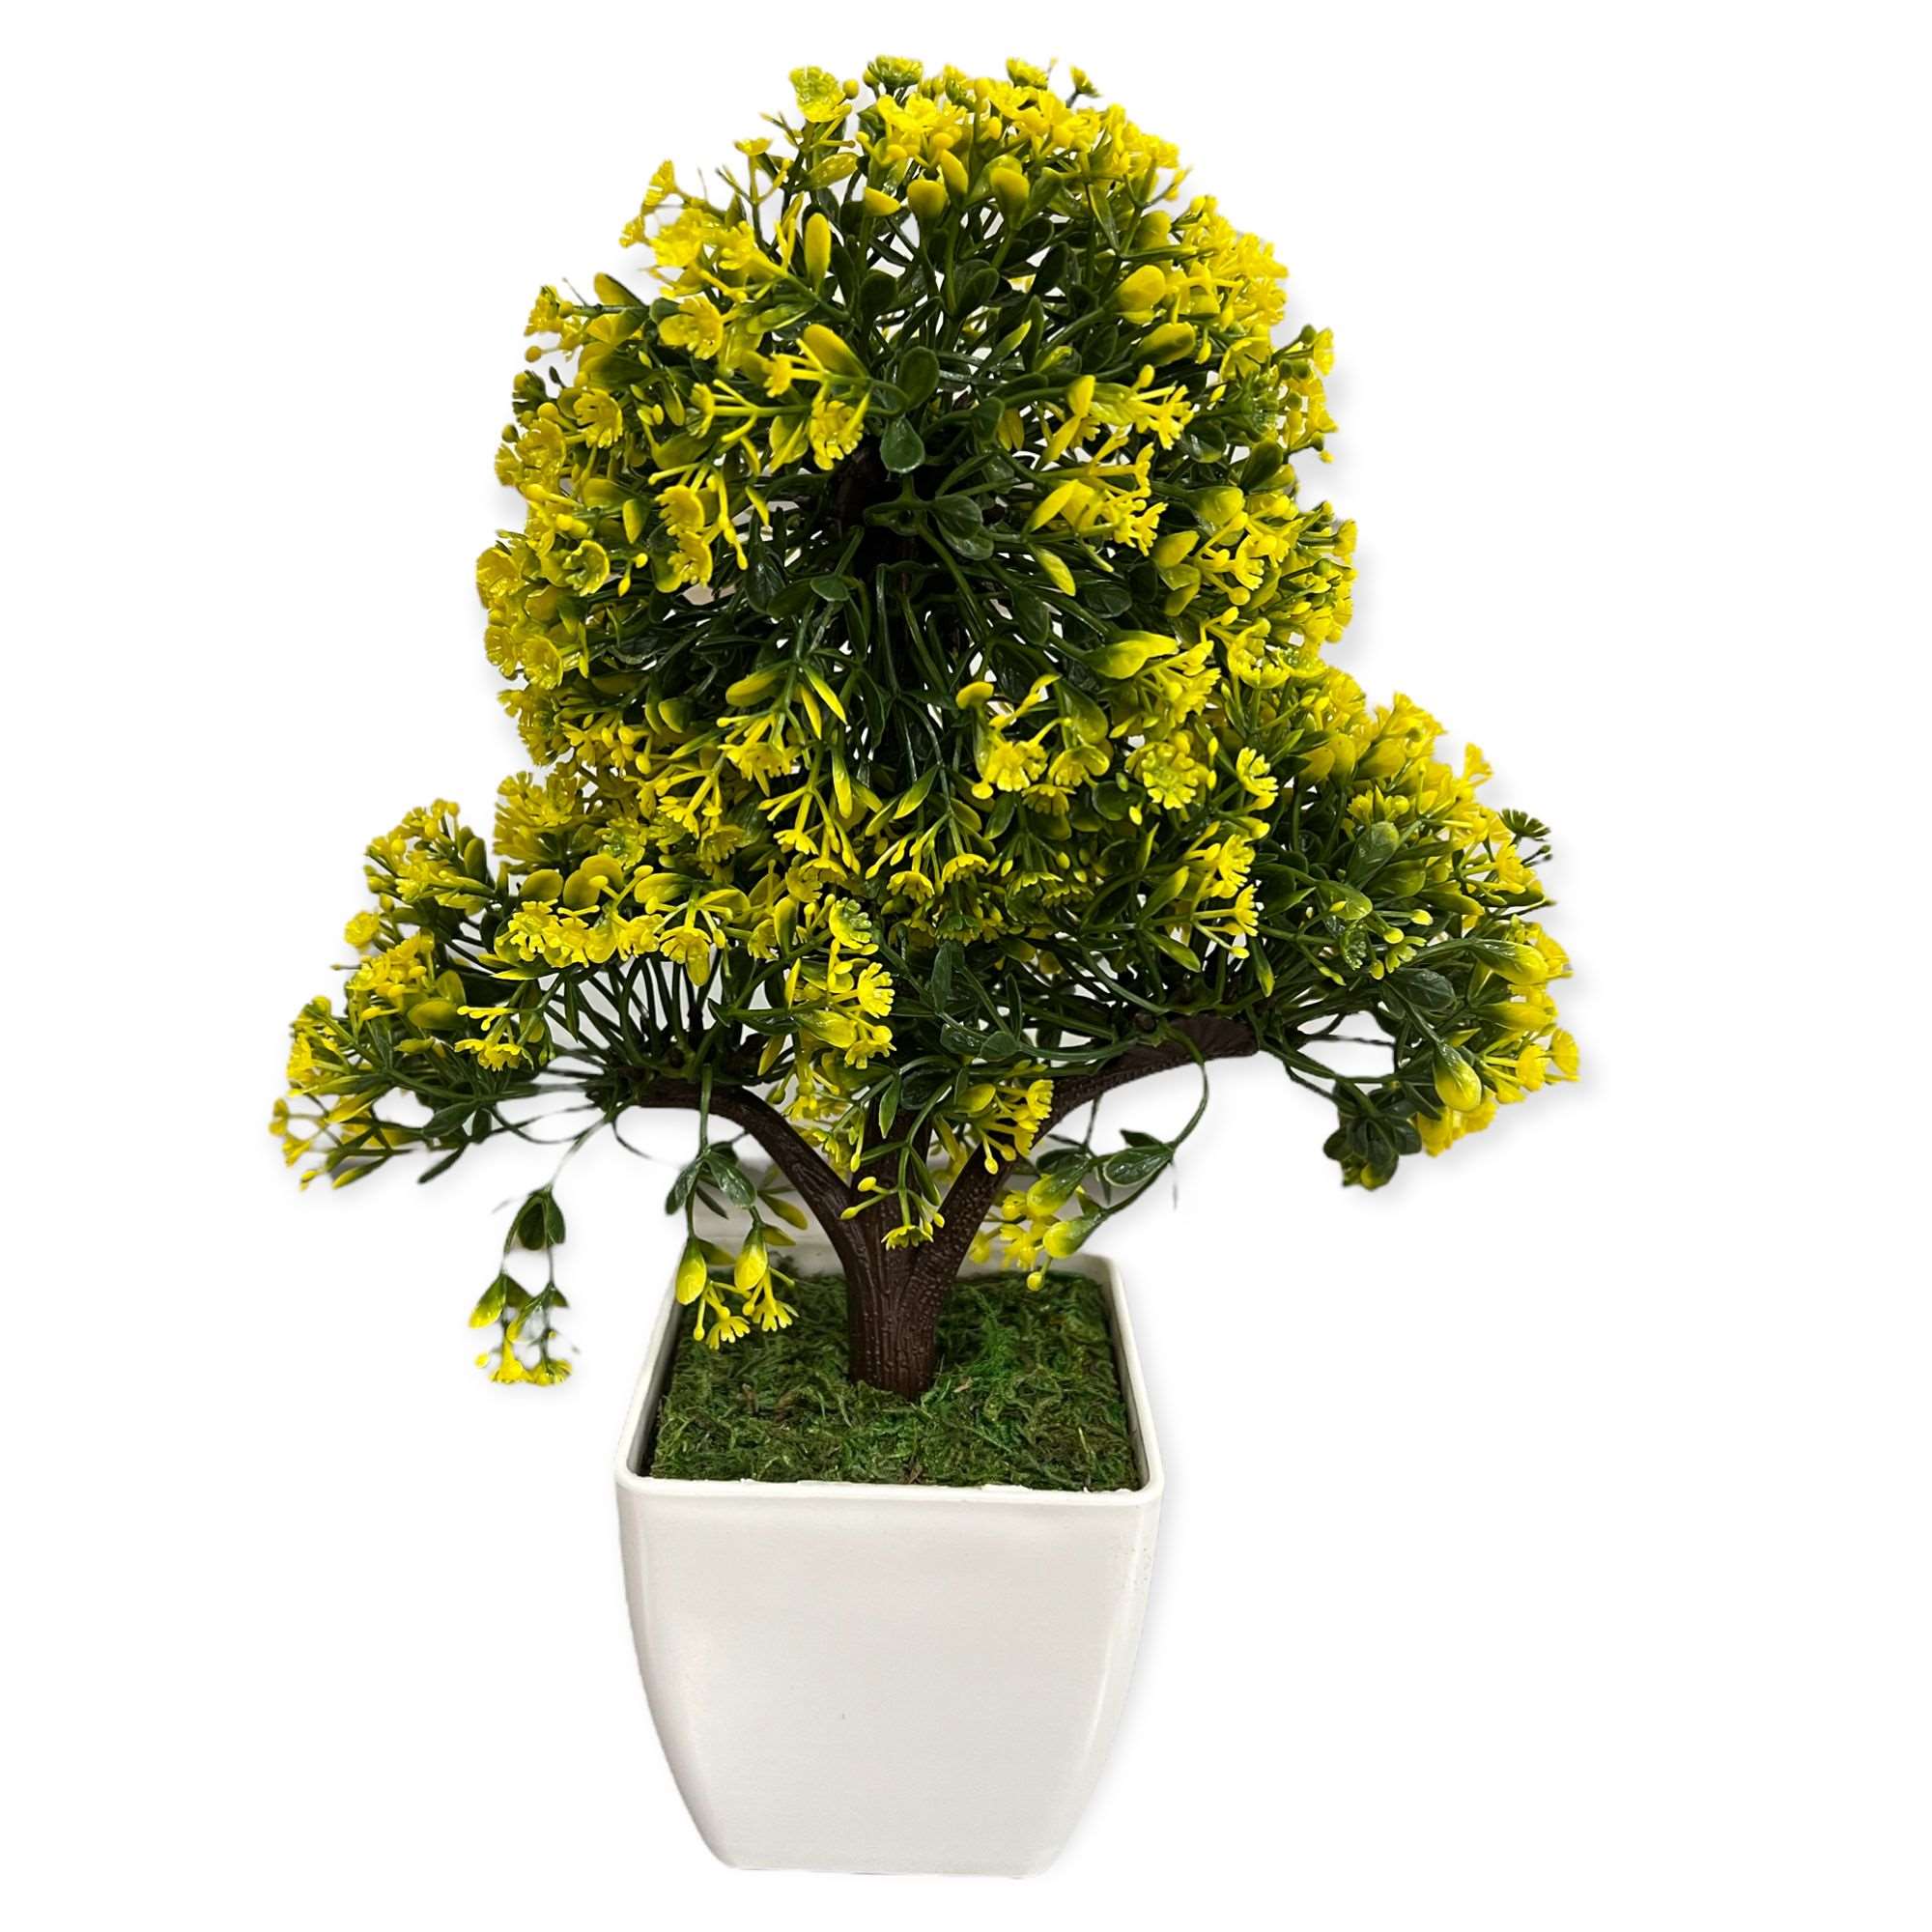 Artificial : Green & Yellow Bonsai with Pot Online on Sale from HnG Nursery for trees & plants